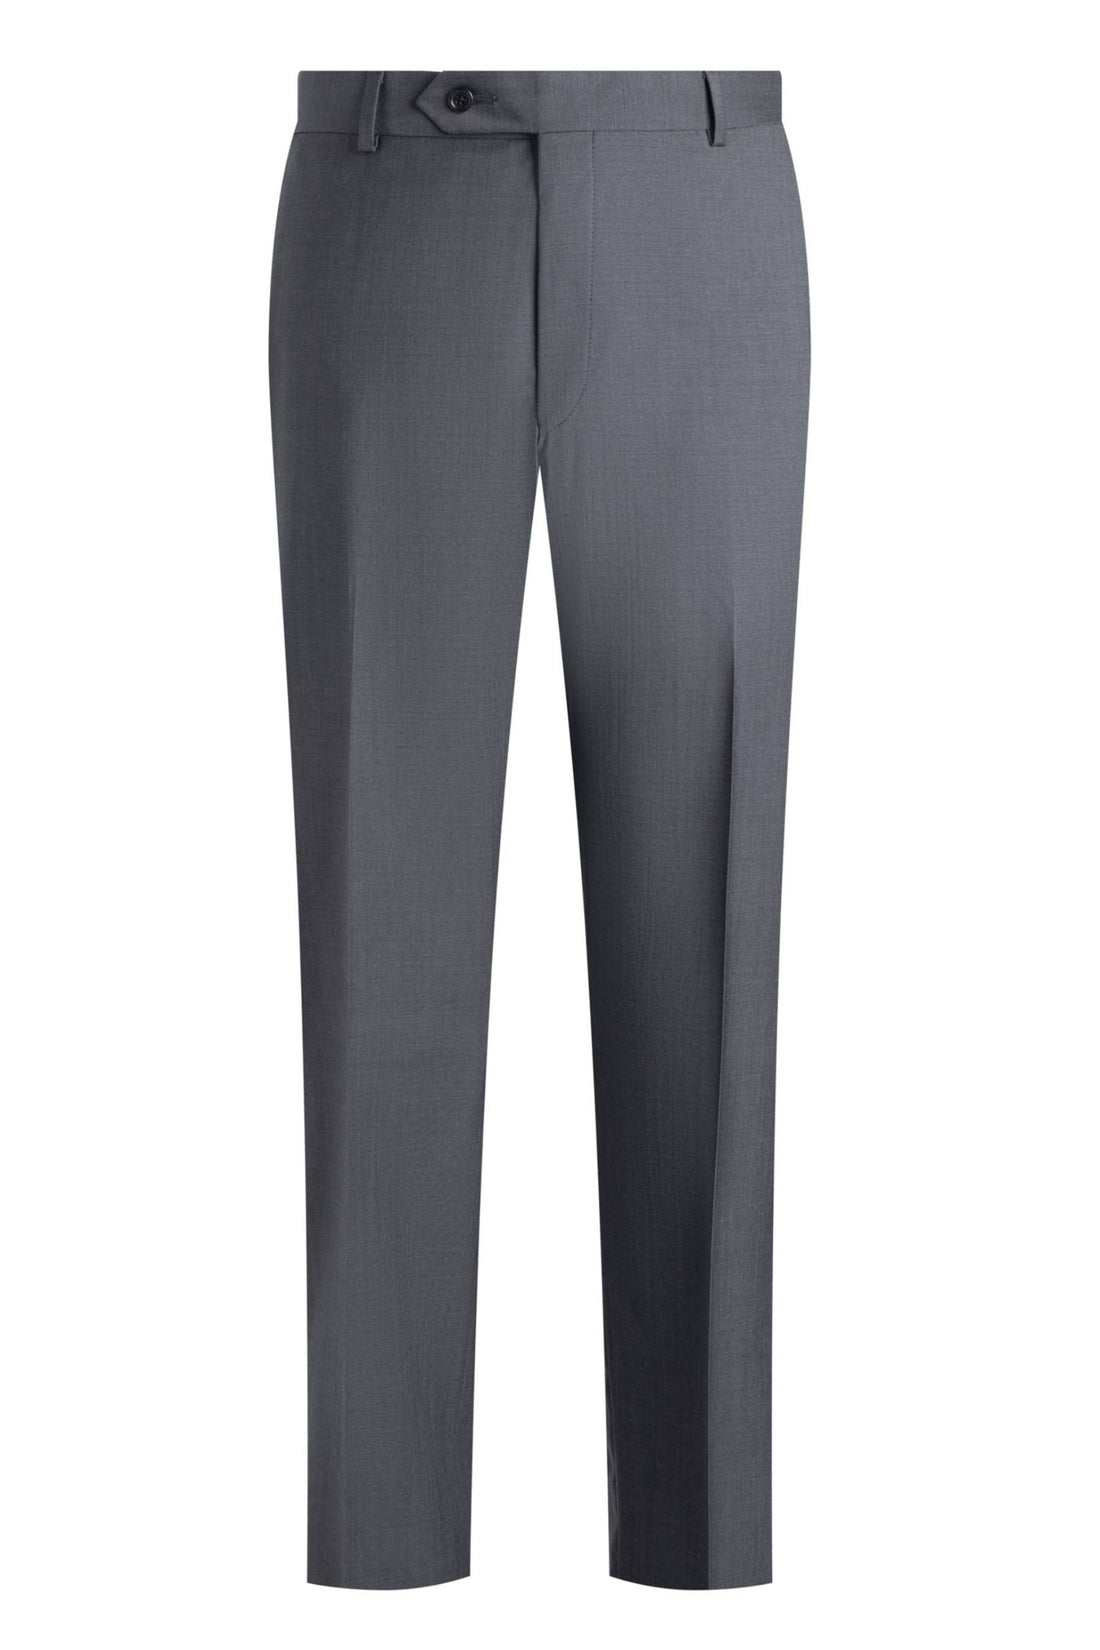 Samuelsohn Grey 130s Flat Front Trousers front